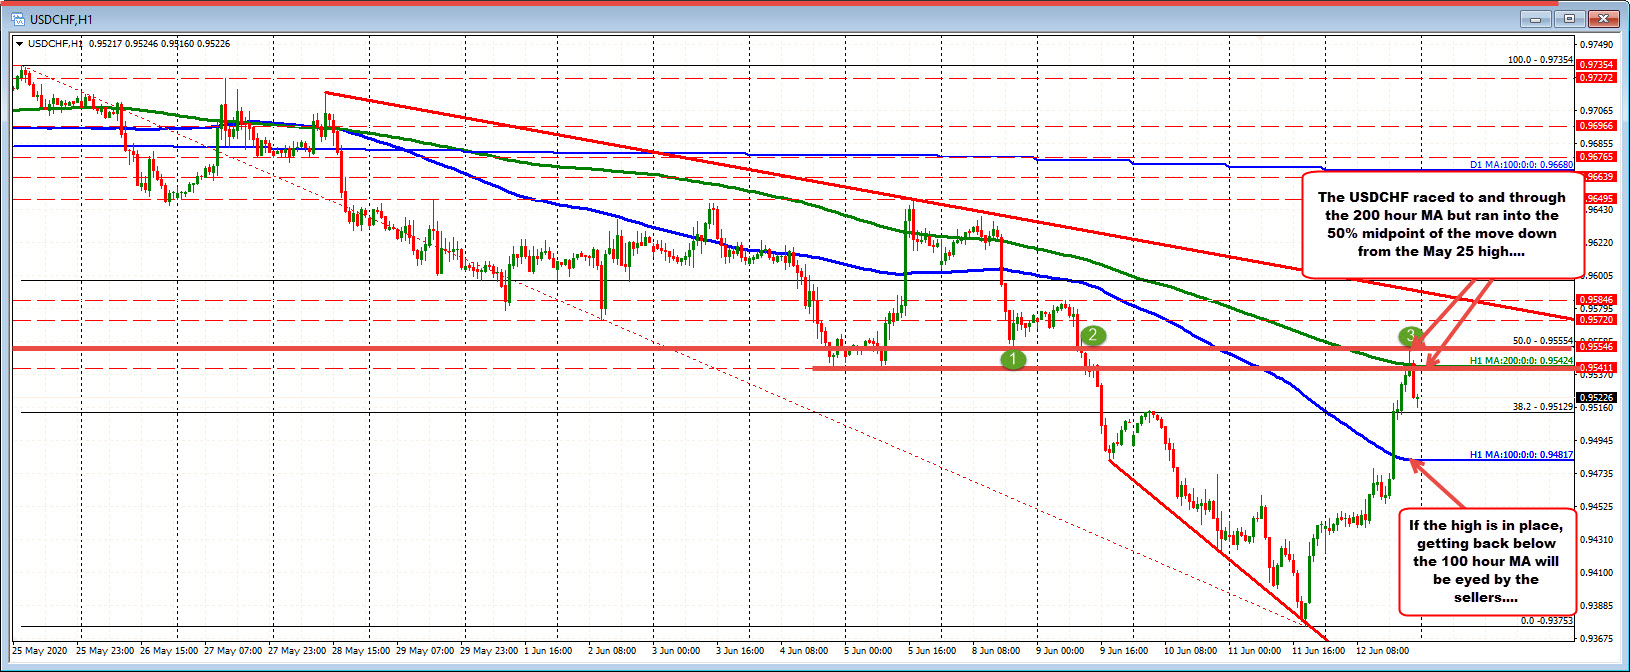 USDCHF stalled ahead of the 50% and near the 200 hour MA